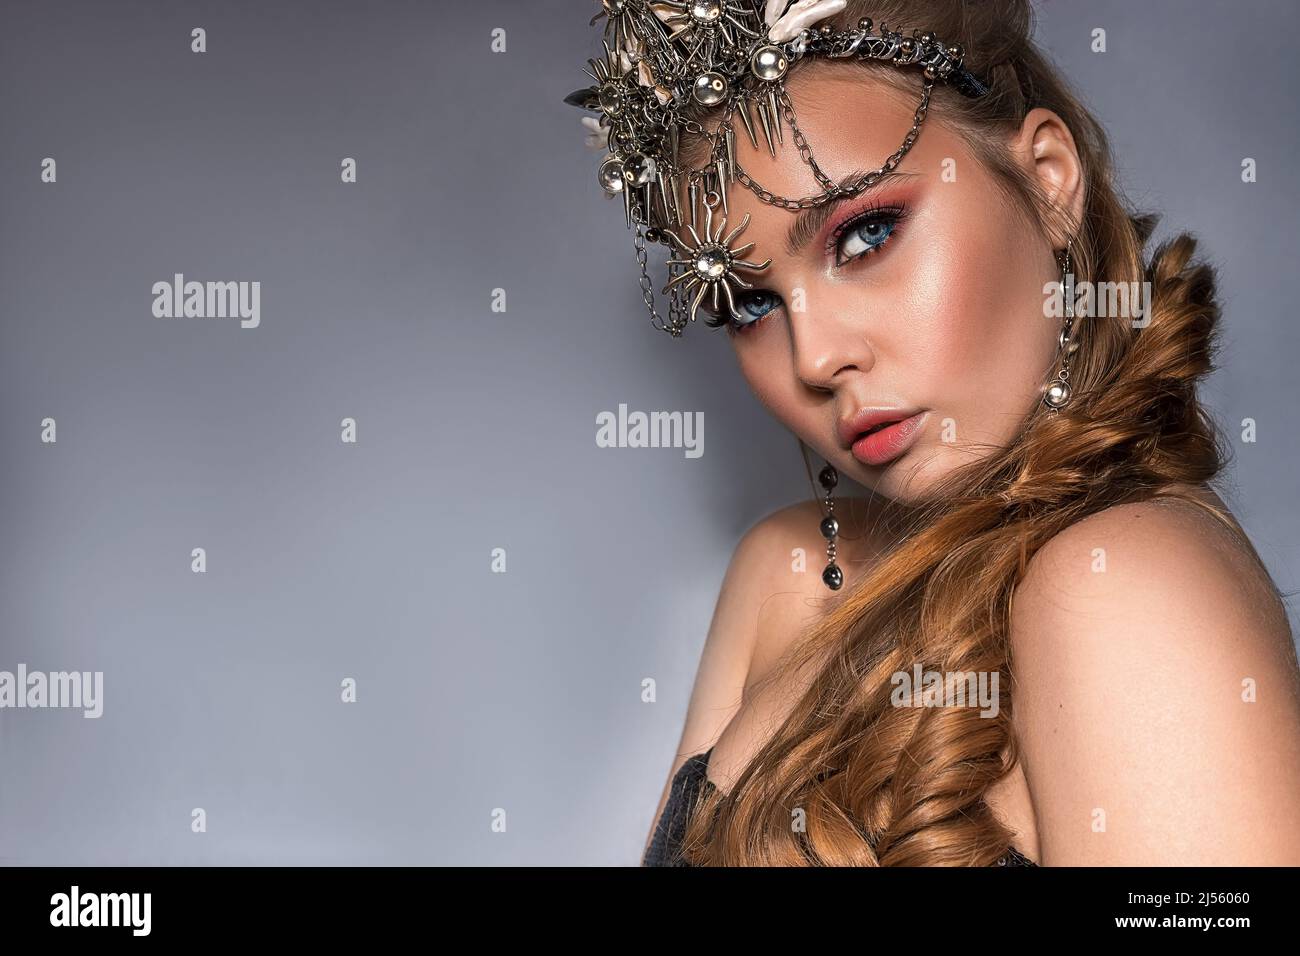 Close up portrait of a young beautiful blonde woman wearing a crown and costume jewelry on a gray background Stock Photo